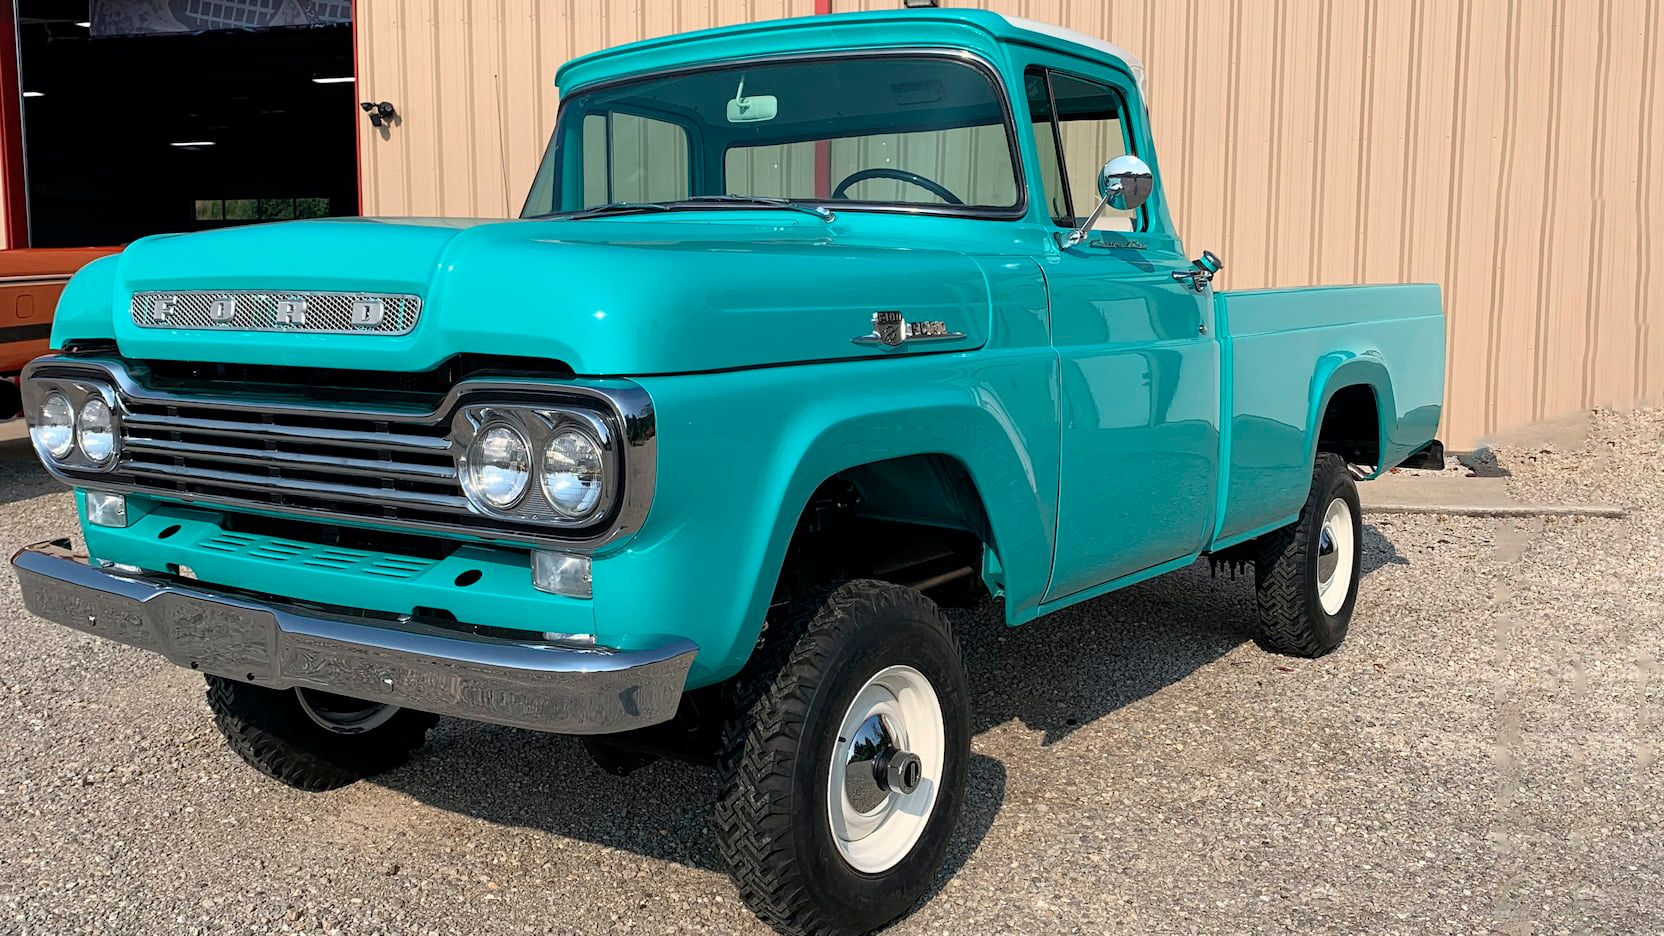 A parked 1959 Ford F100 4x4